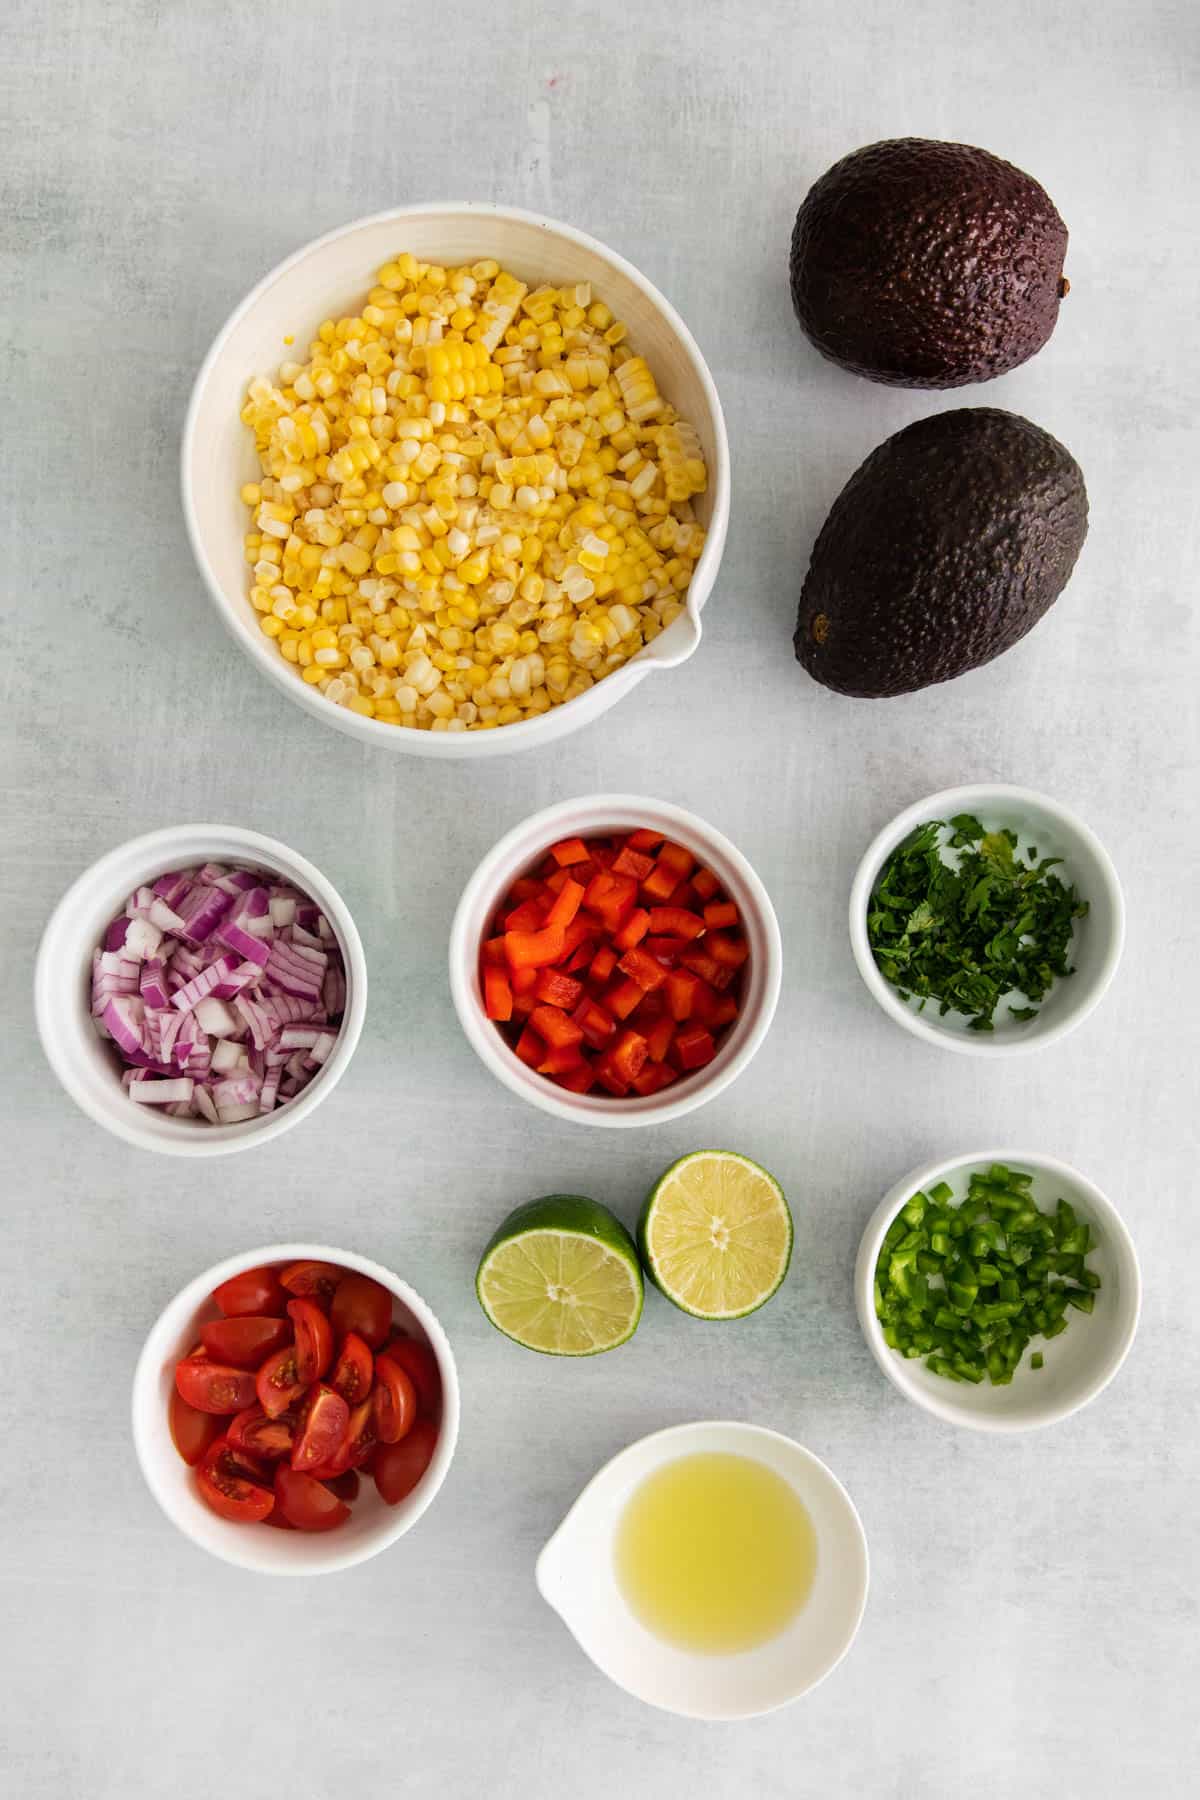 Ingredients for corn and avocado salad in separate bowls.